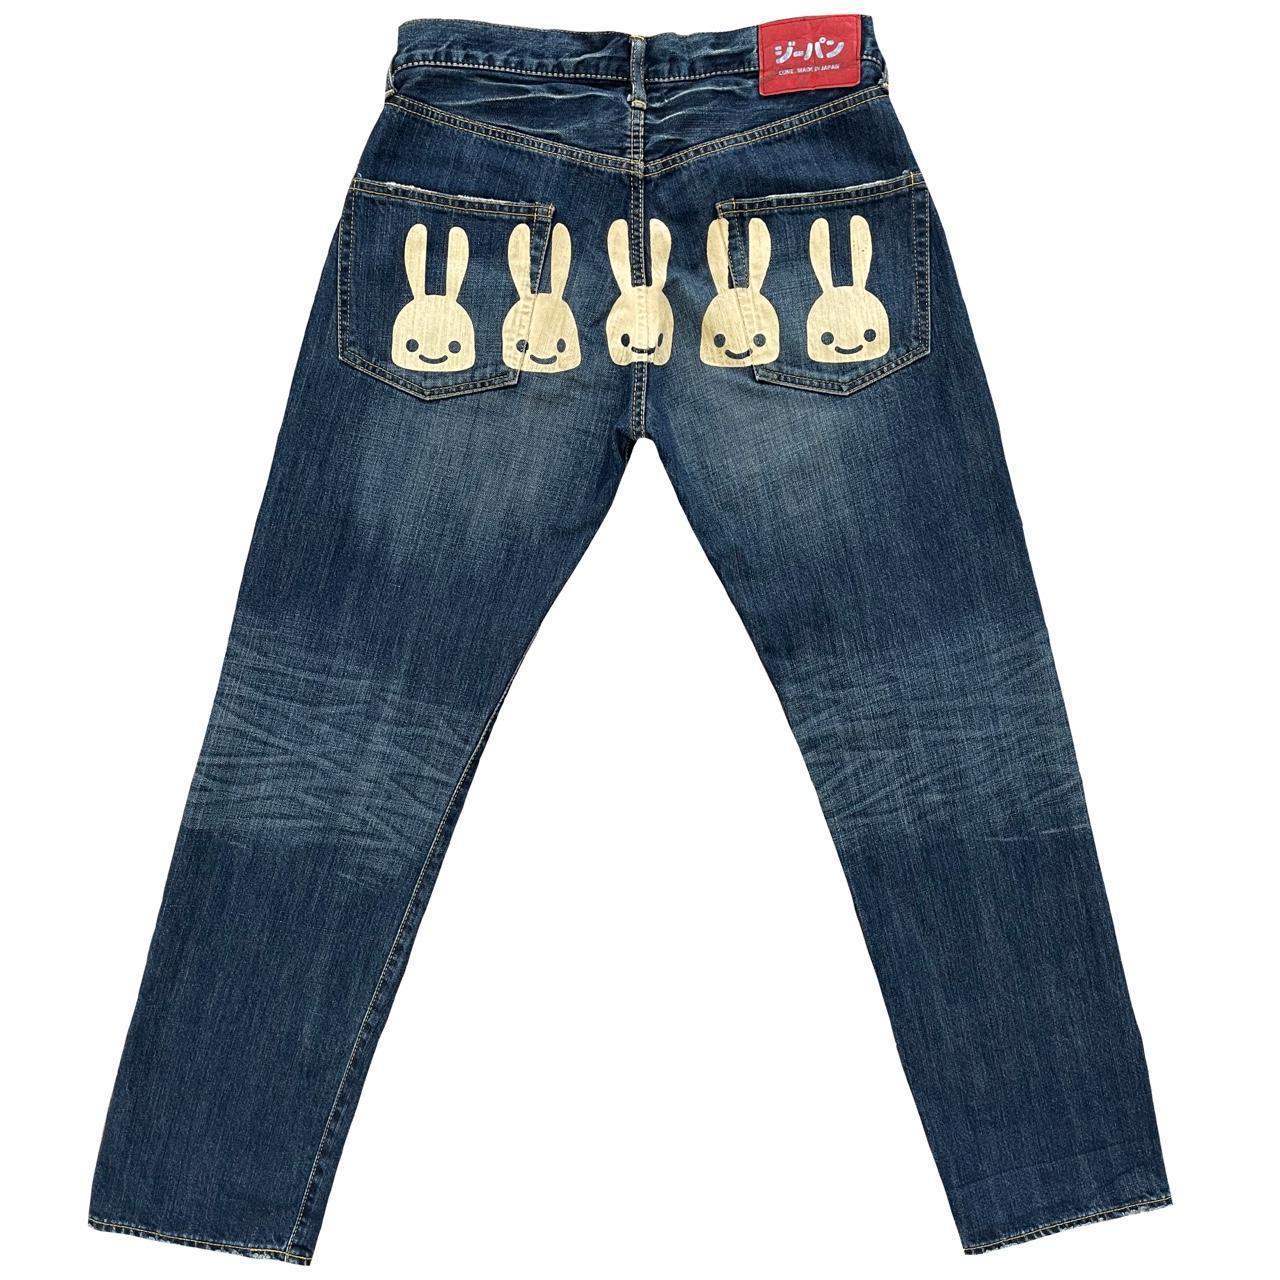 Cune Bunny Jeans, Made in Japan. High quality